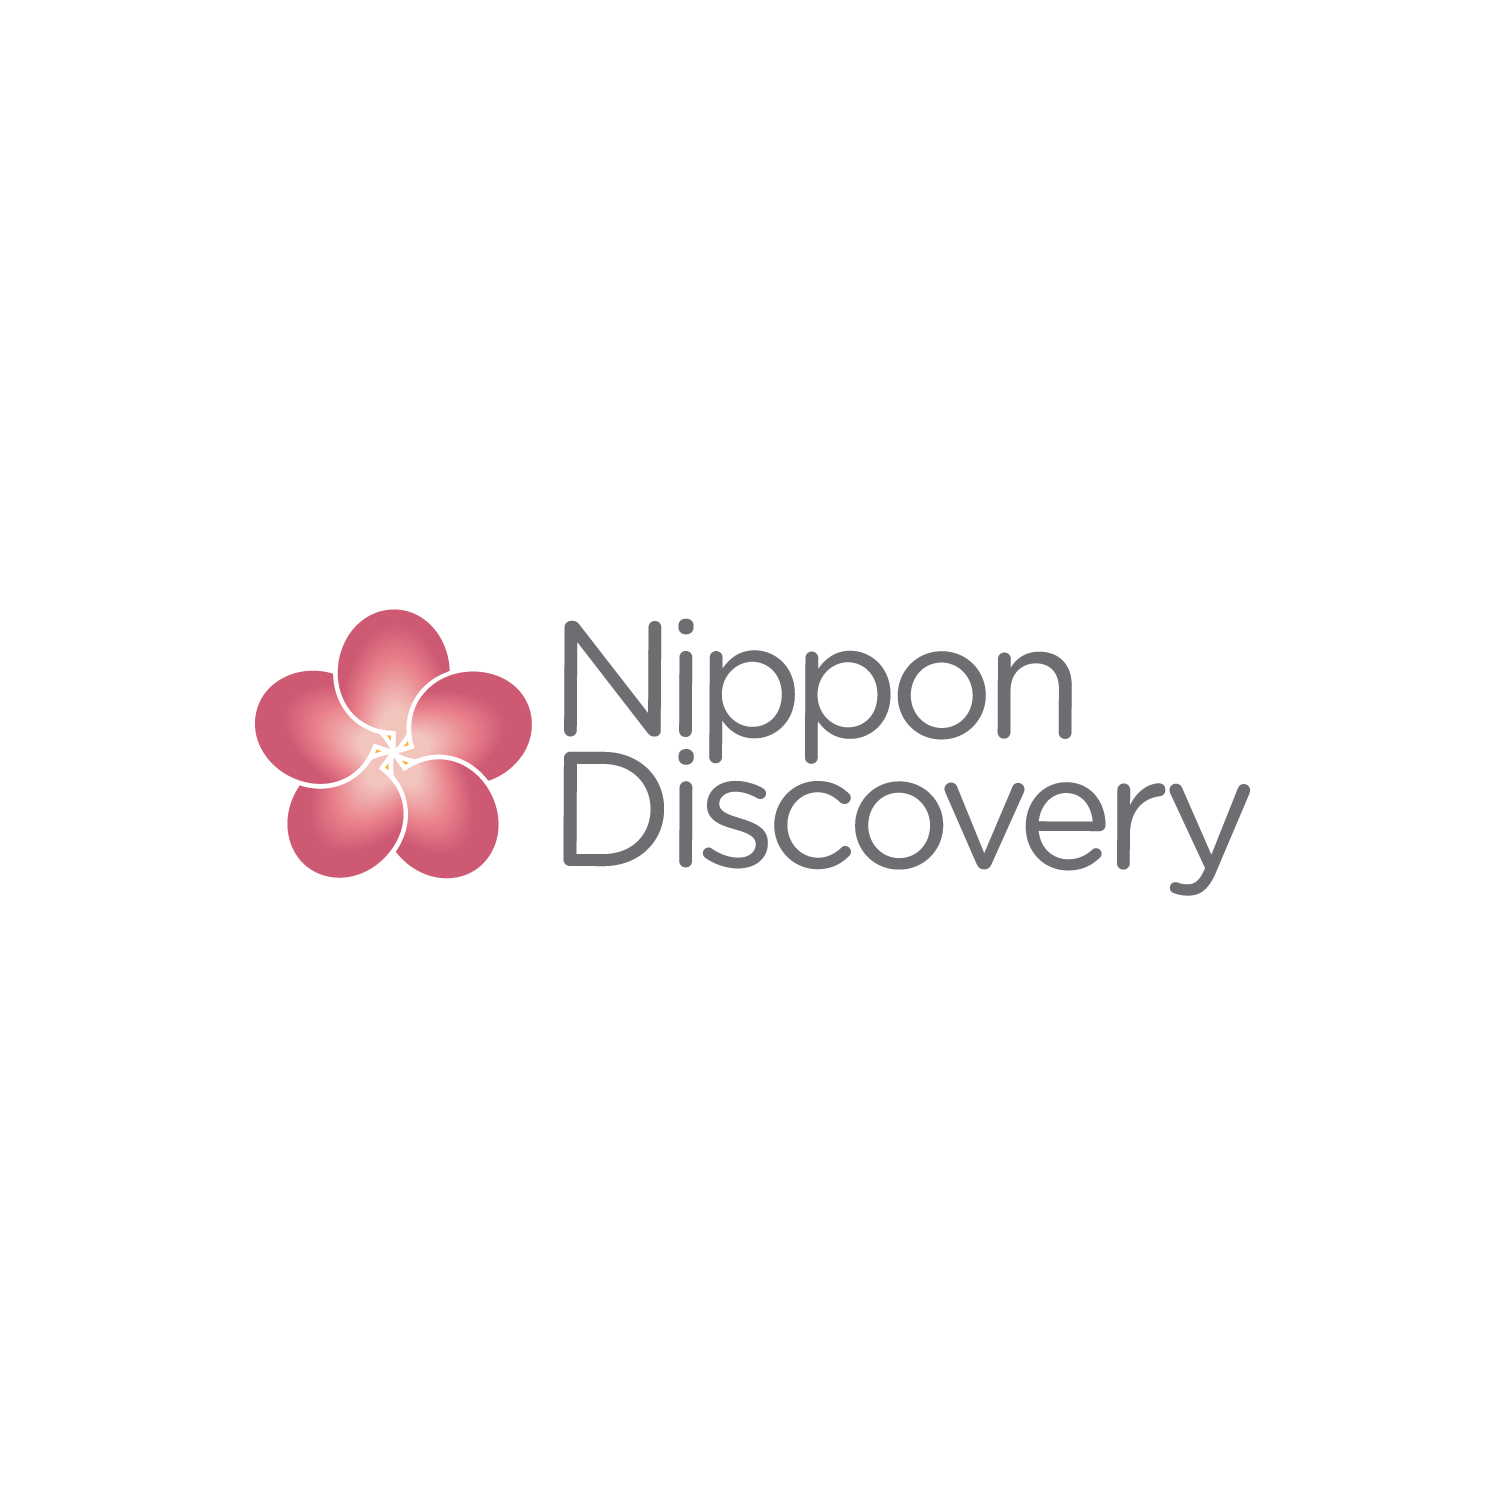 Nippon Discovery